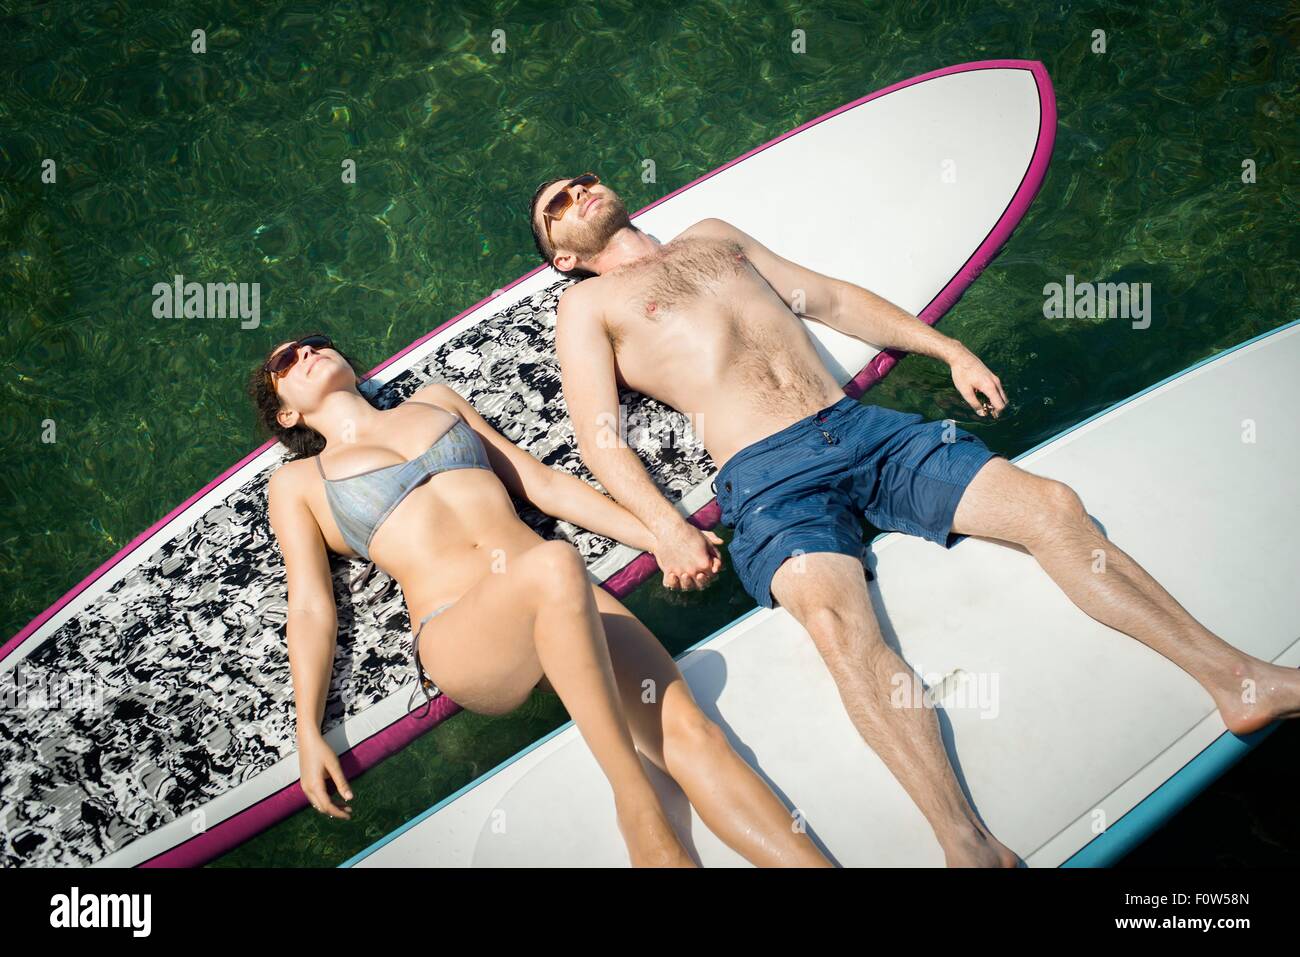 Overhead view of young couple sunbathing on paddleboards Stock Photo